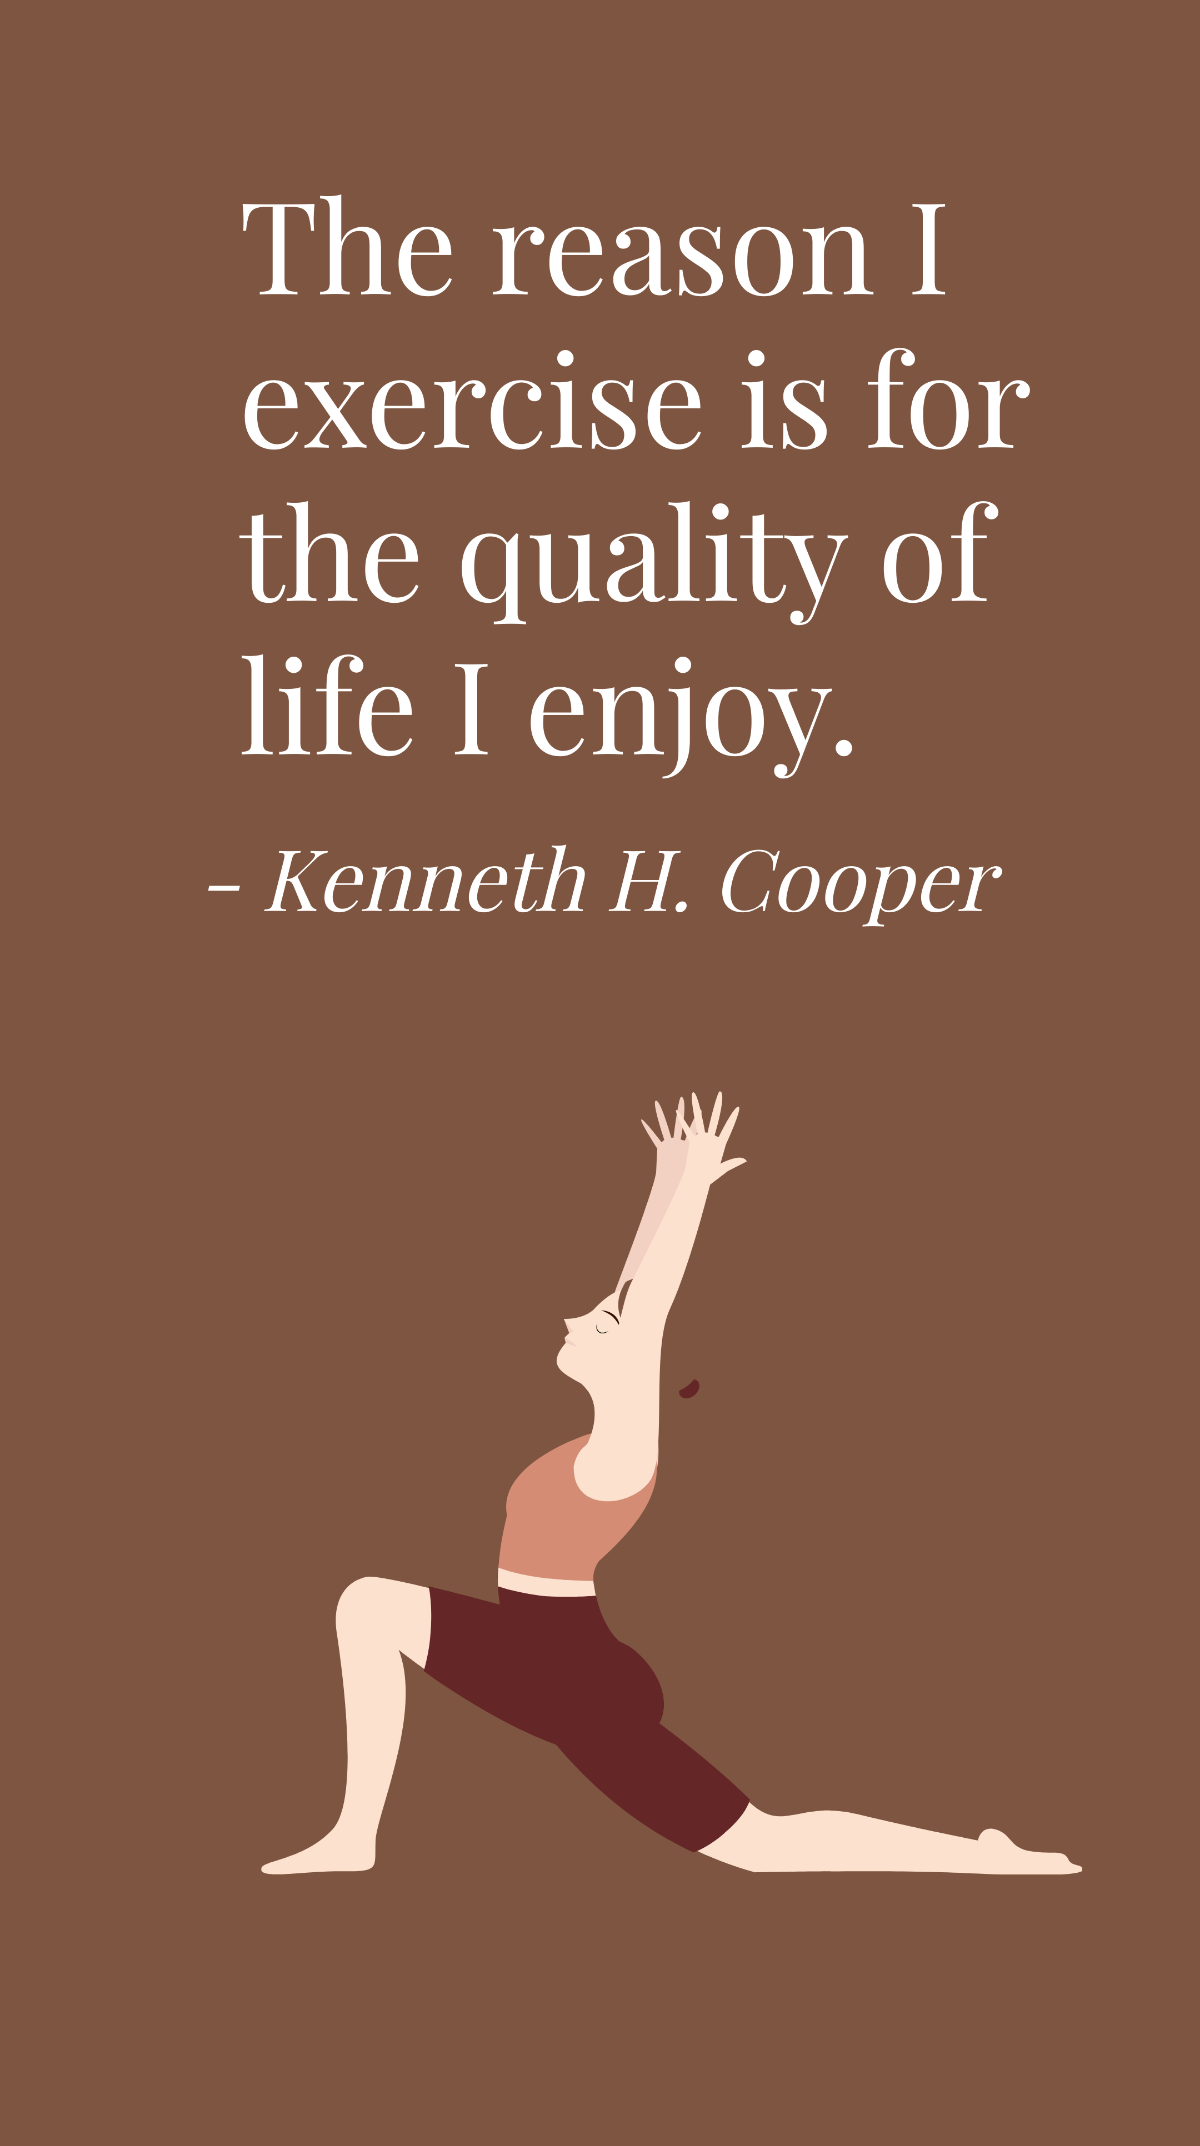 Kenneth H. Cooper - The reason I exercise is for the quality of life I enjoy.